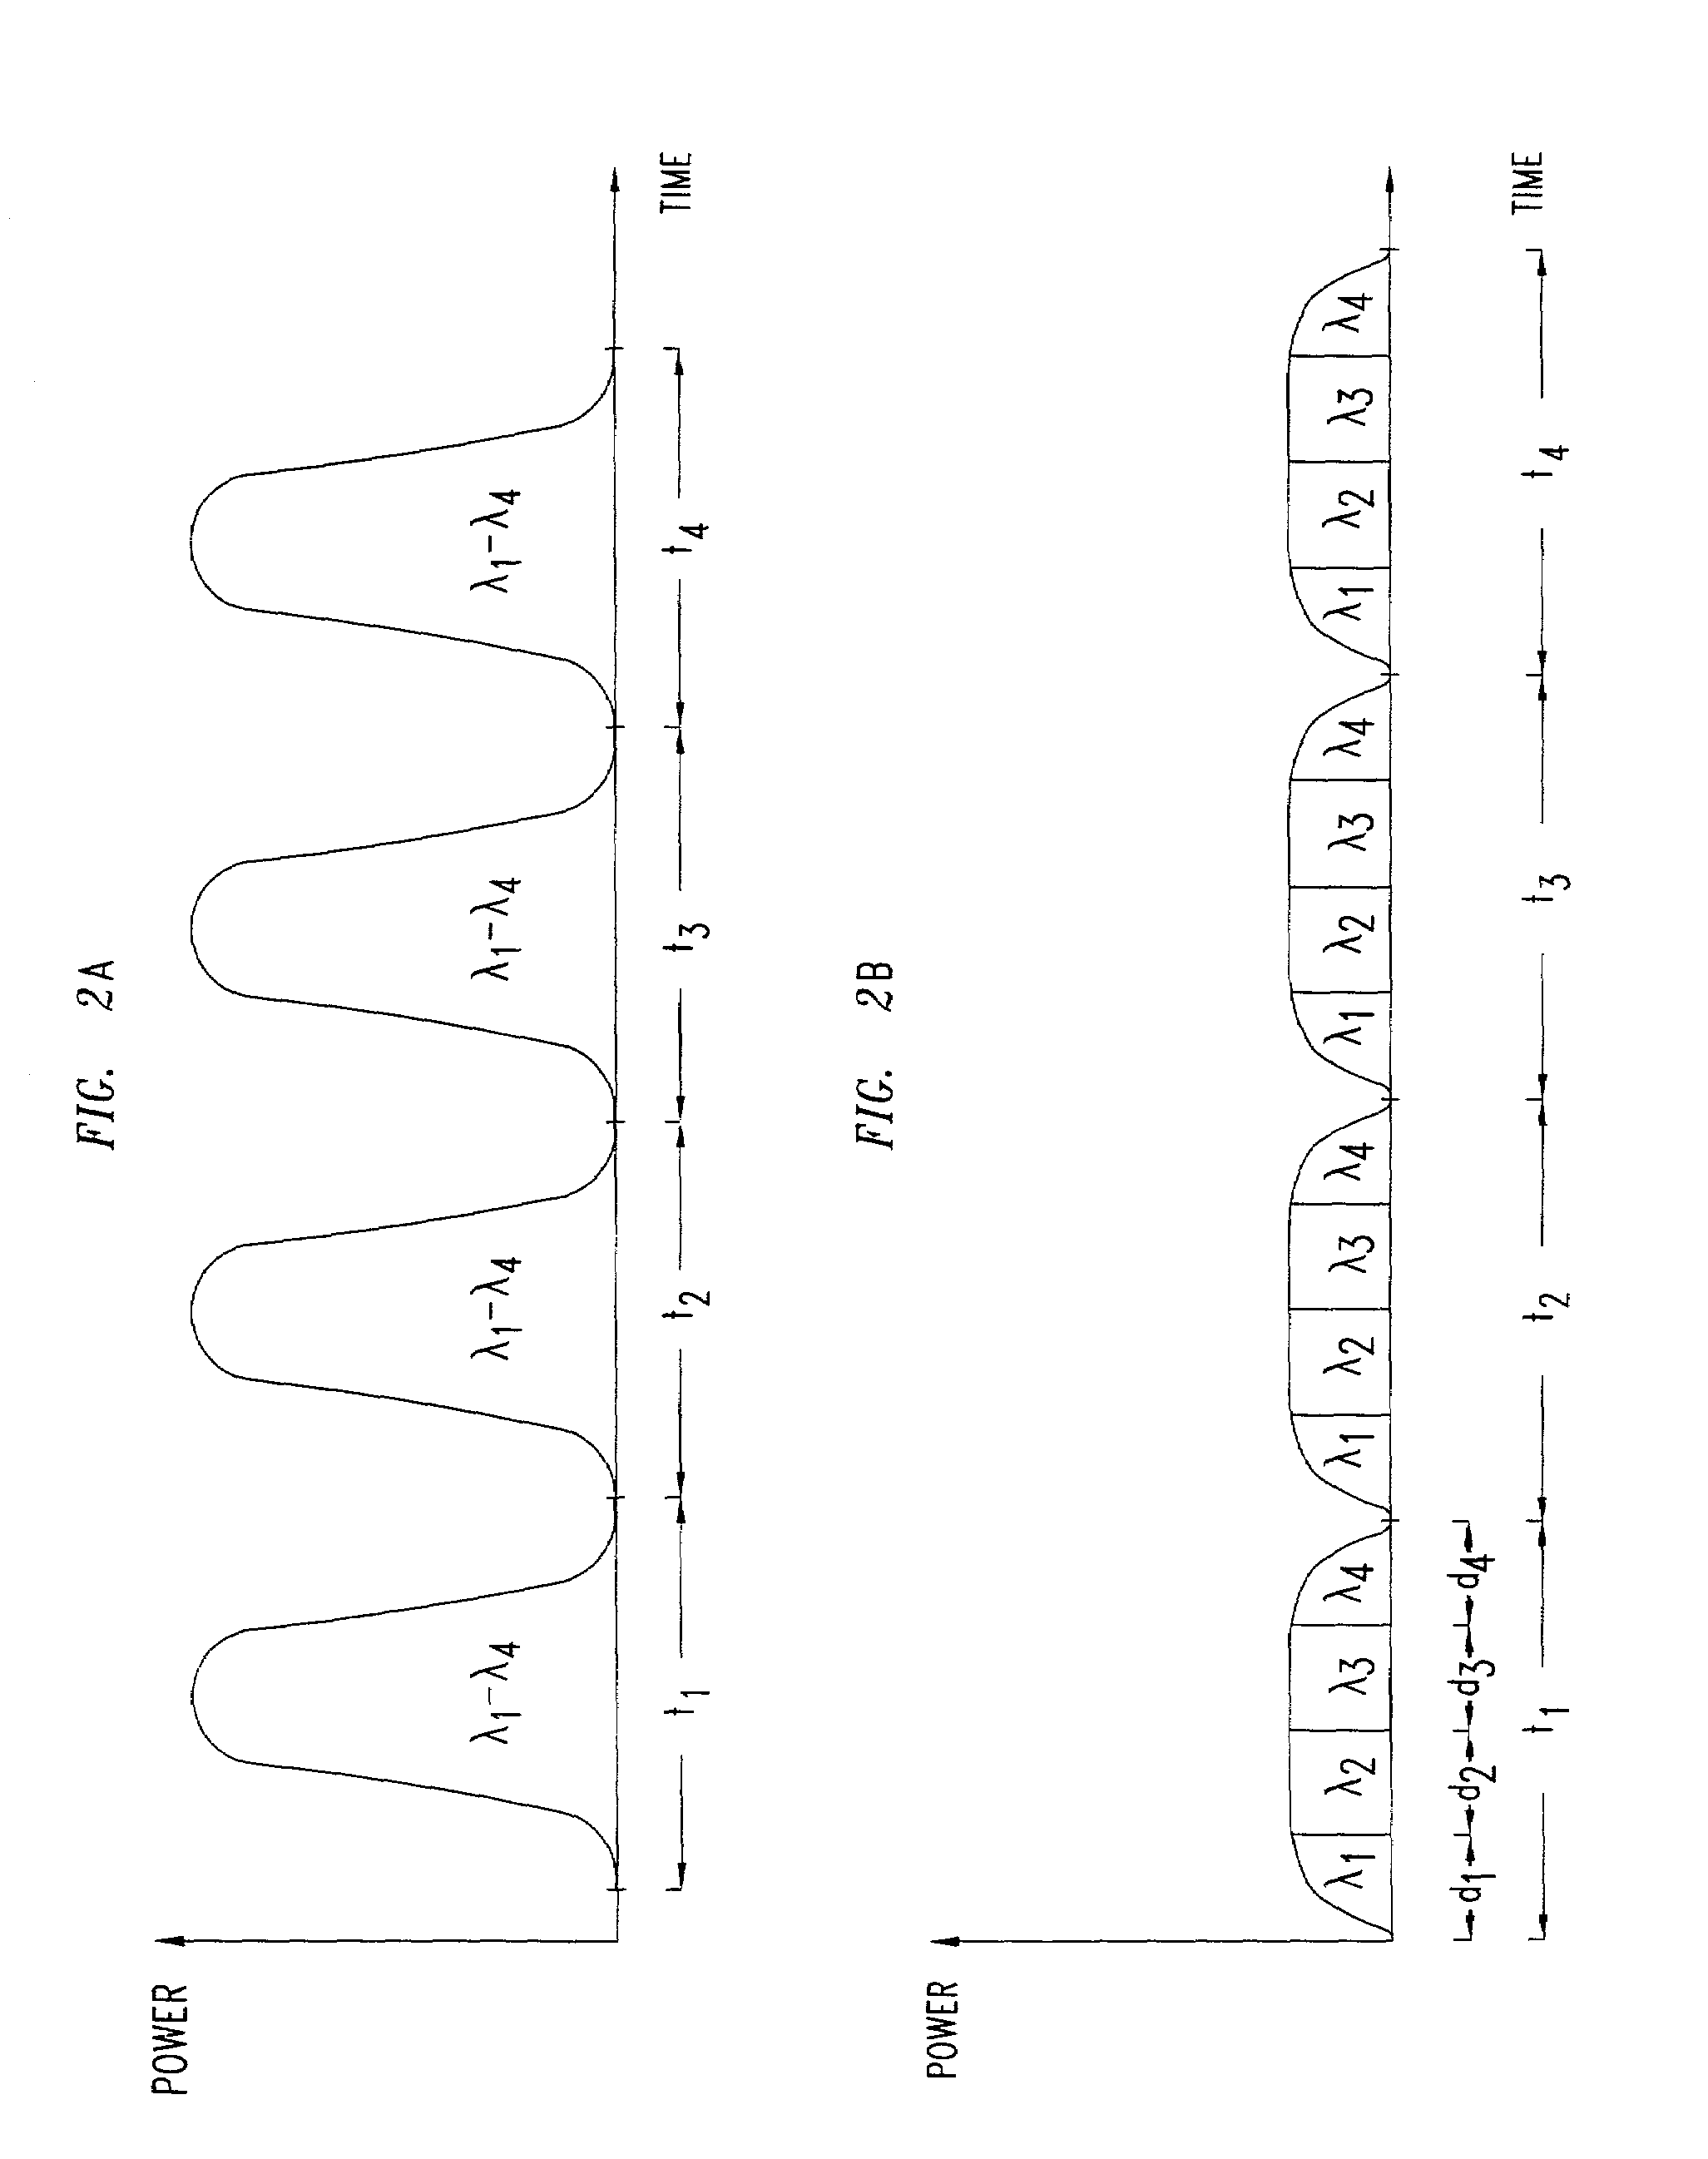 Modulation phase shift to compensate for optical passband shift